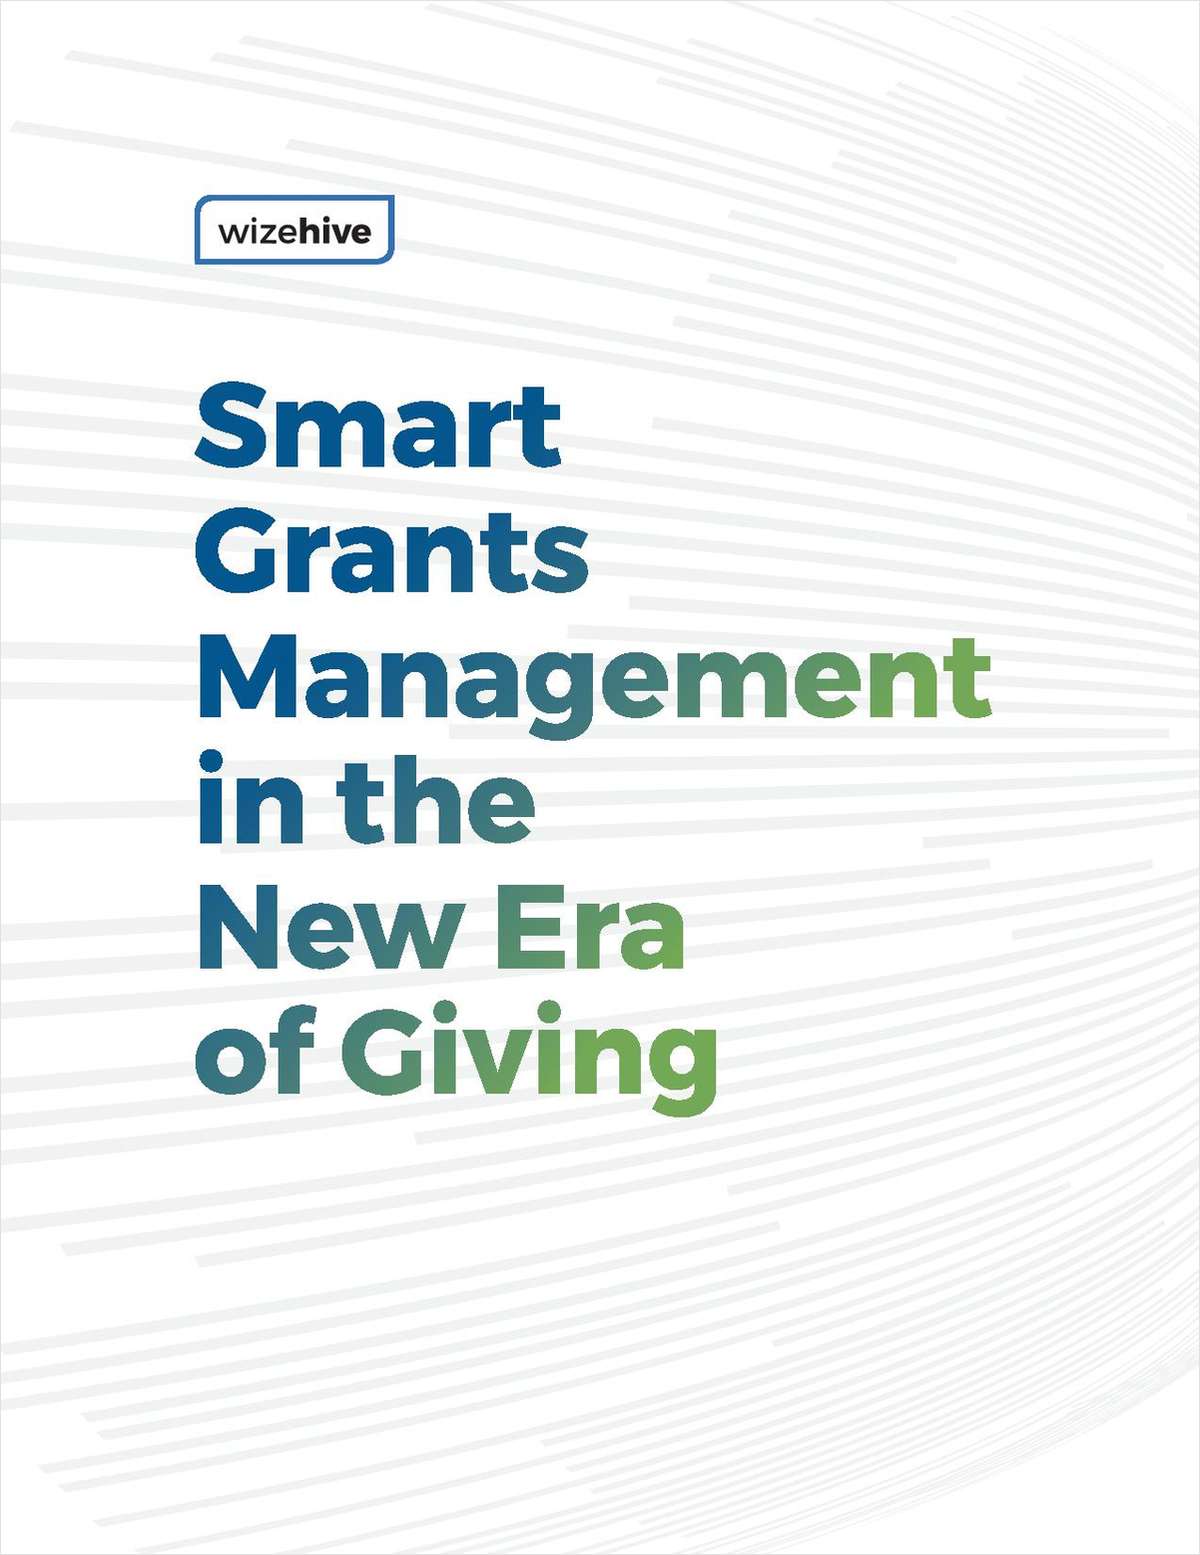 Smart Grants Management in the New Era of Giving